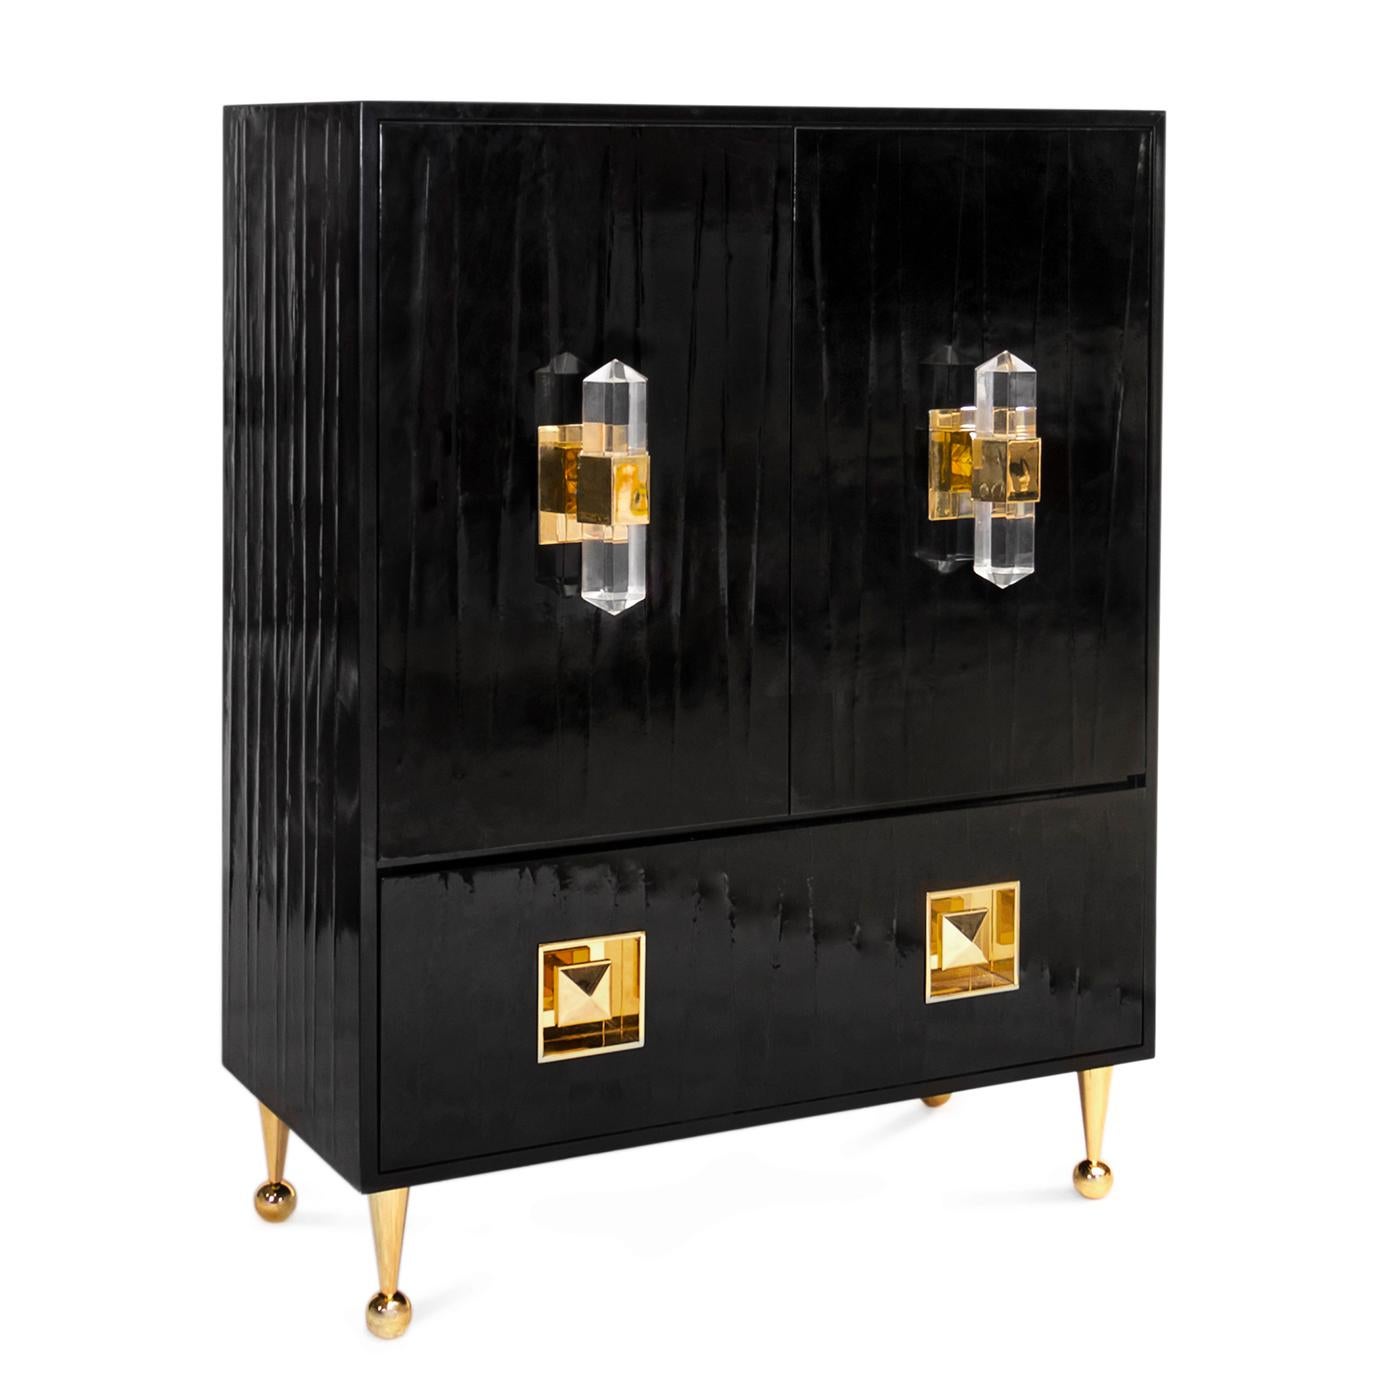 Megawatt modern. Hollywood Glam and Studio 54 hedonism collide in our Crawford cabinet. Glossy black lacquer featuring a subtle ripple texture is perched on our signature ball and cone polished brass legs. The pièce de résistance, faceted acrylic